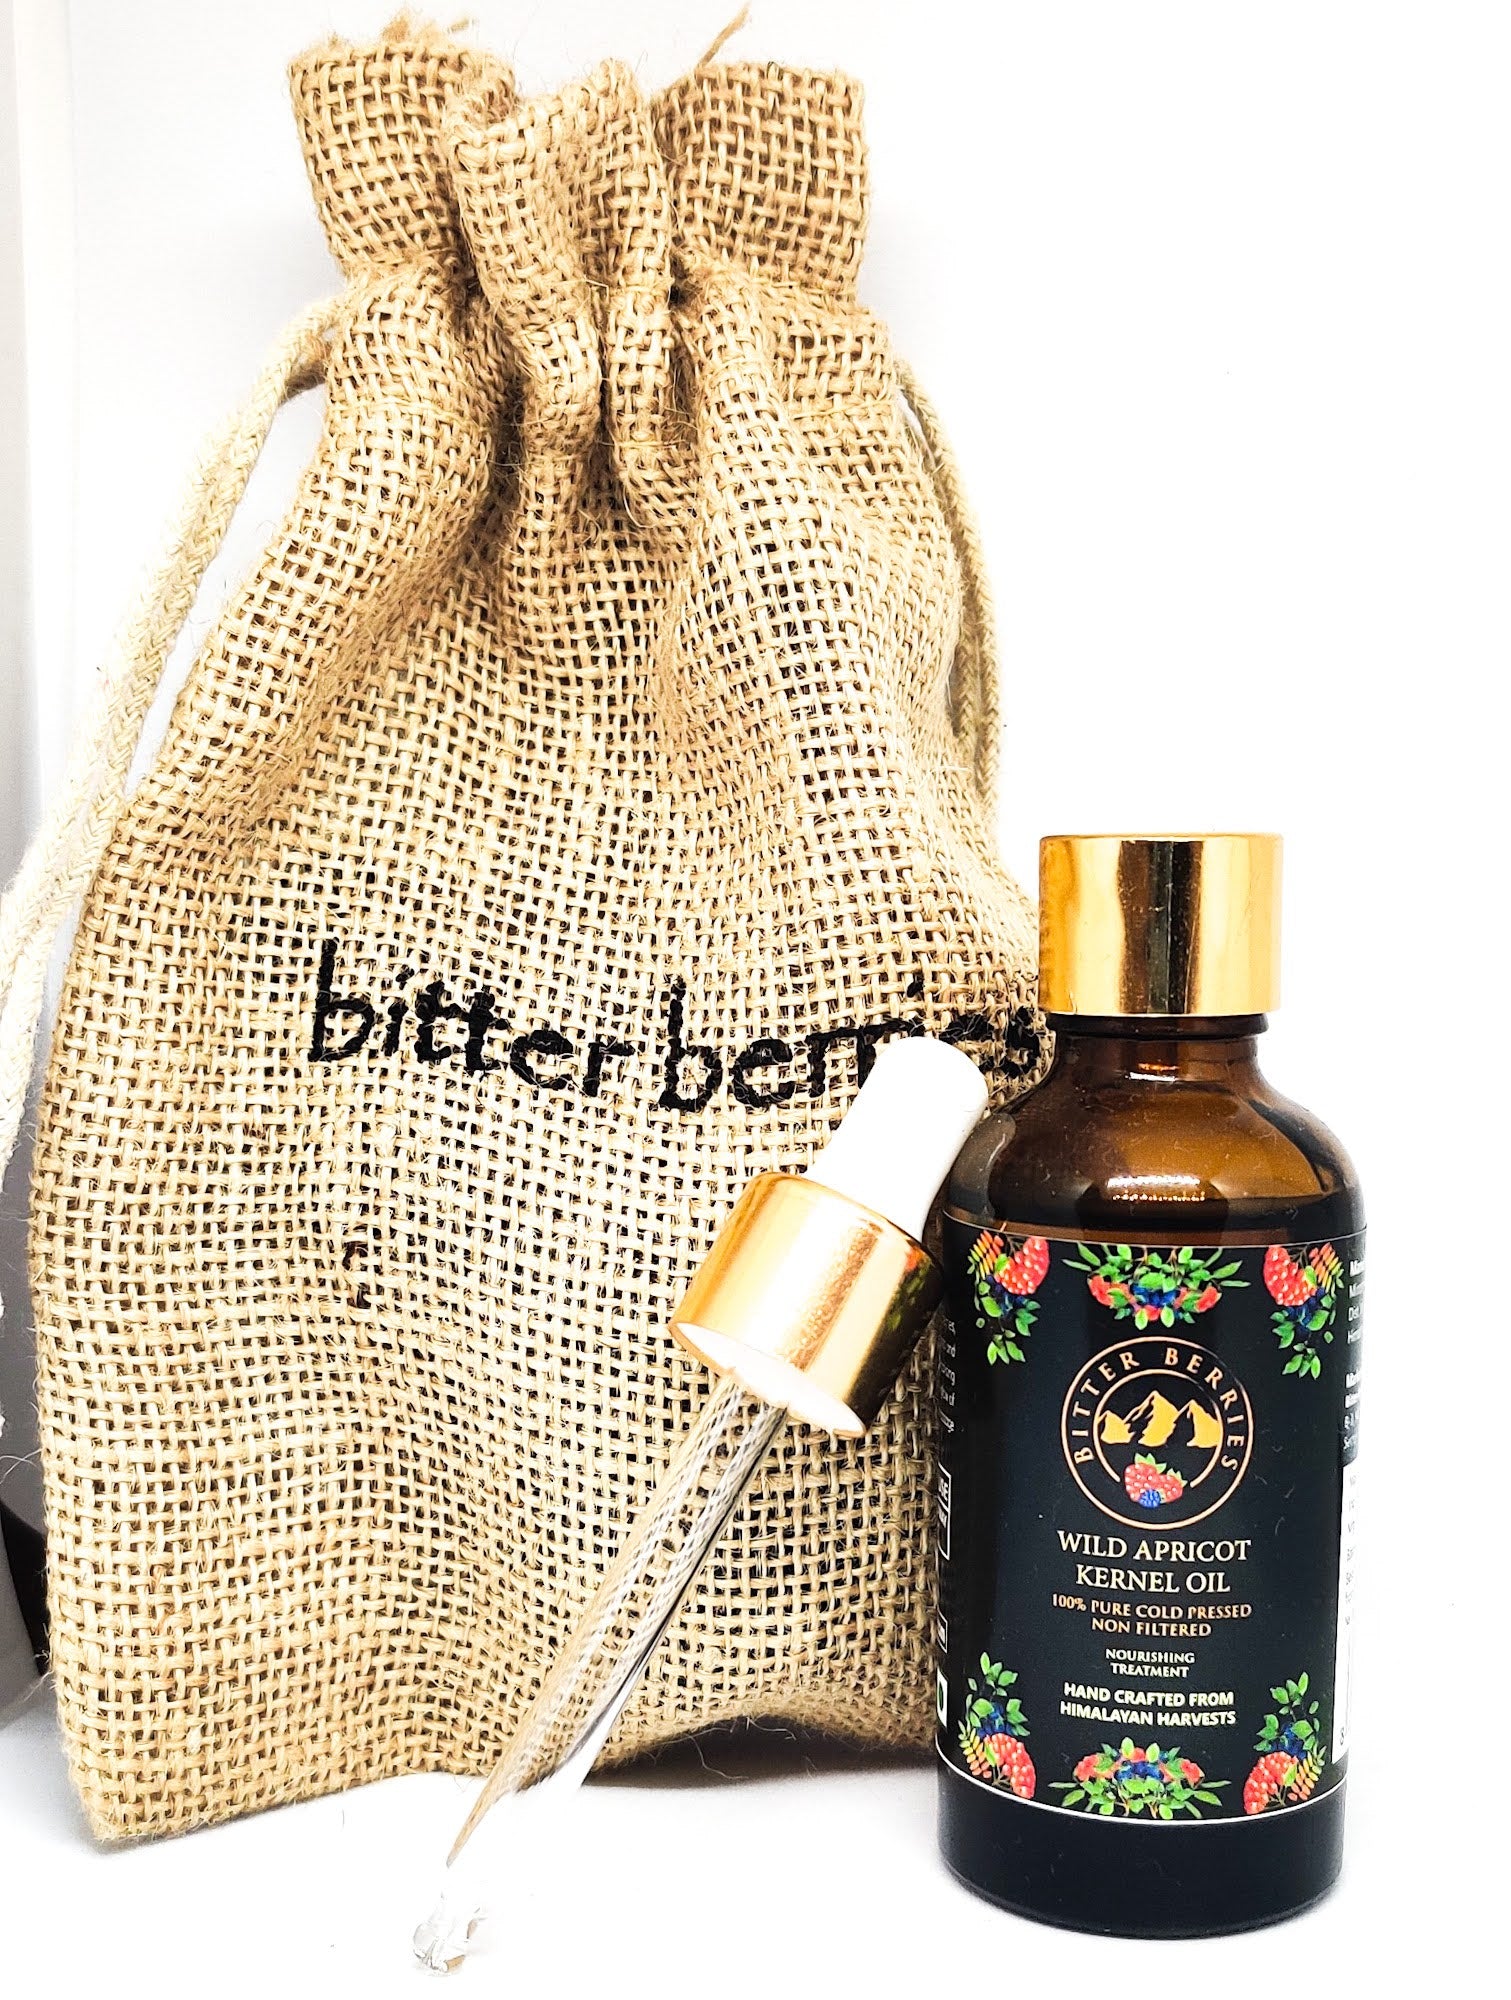 Bitter Berries brings to you 100% Natural Cold Pressed Wild Apricot Oil from the heart of the Himalayan Mountains